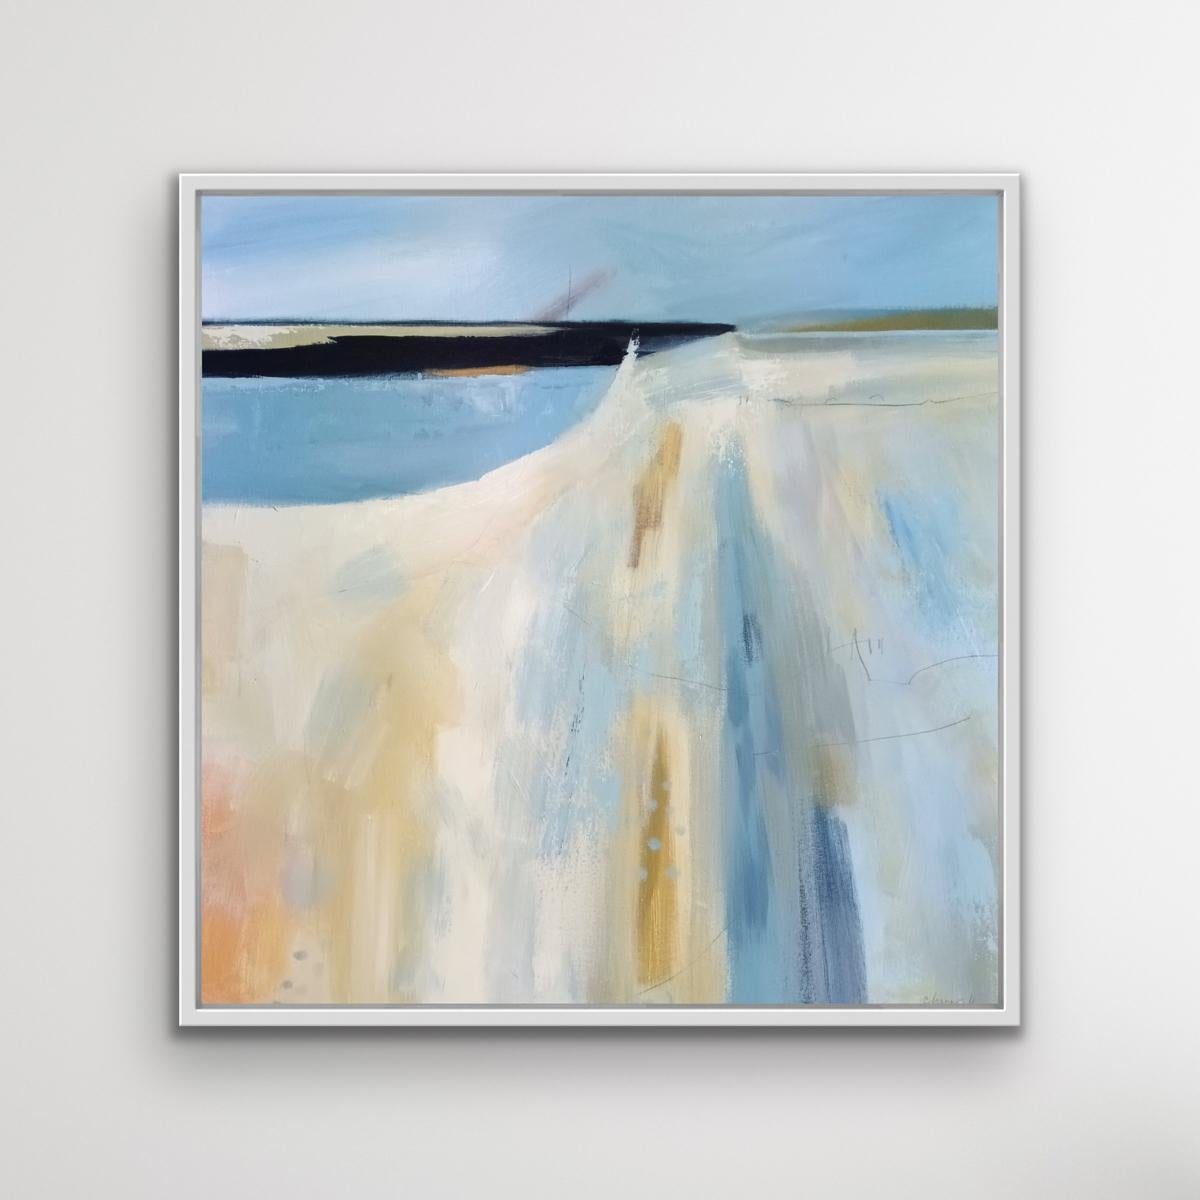 Coastal Blue is an original mixed media painting by artist Caroline Chappell. The soft blue colour palette is contrasted by the layered white and sand tones.

Caroline Chappell's original paintings are available for sale online and through our art